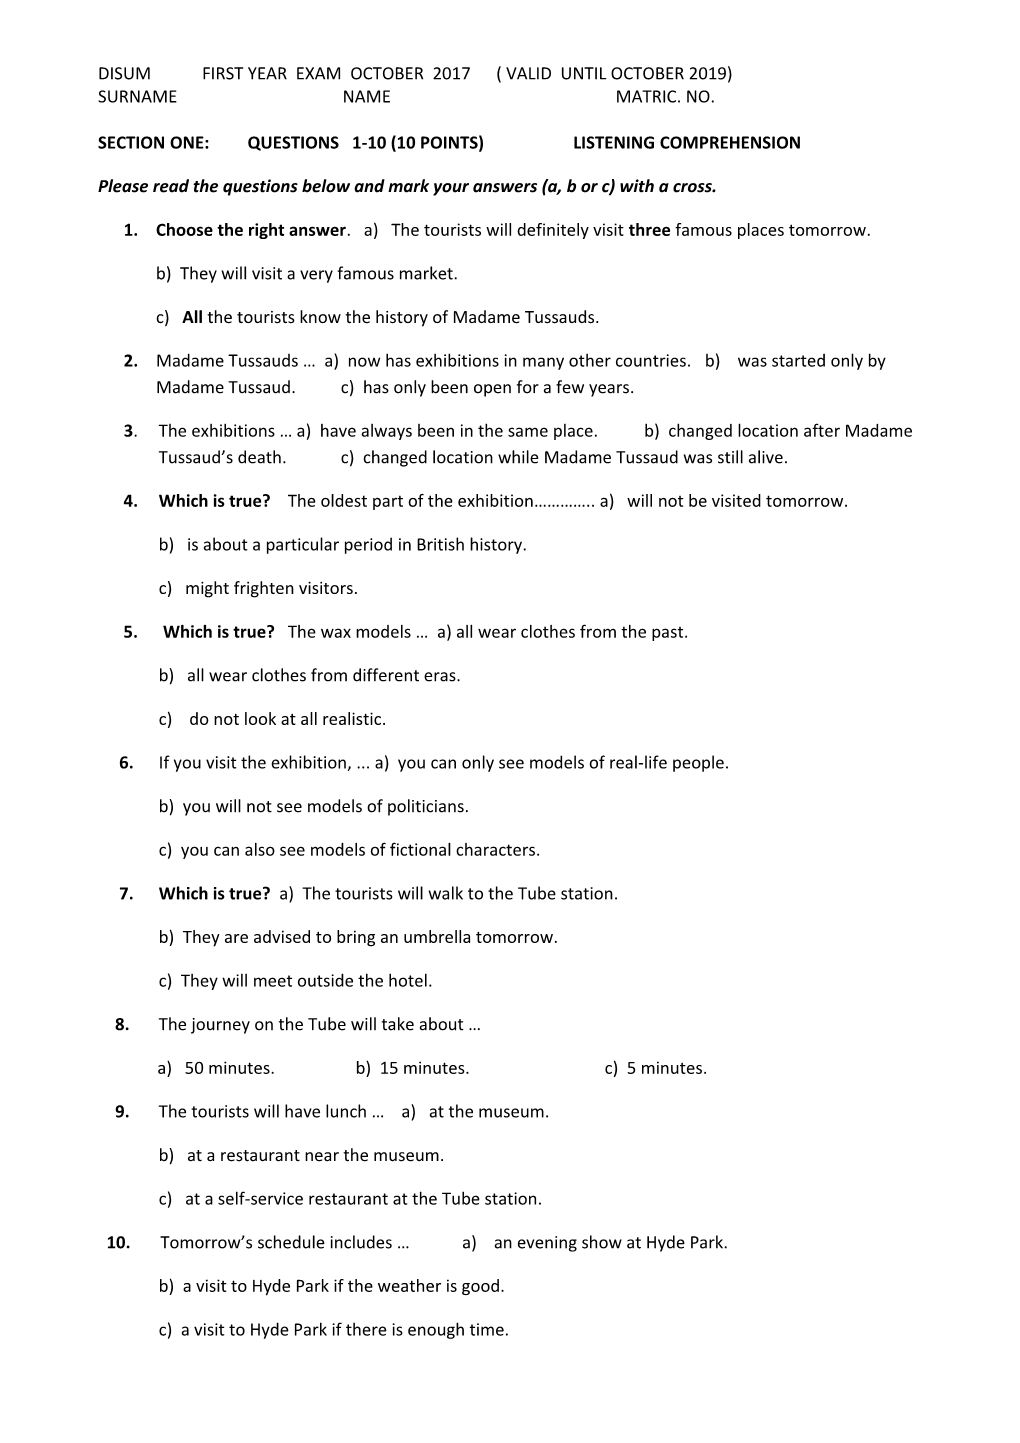 Section One: Questions 1-10 (10 Points) Listening Comprehension